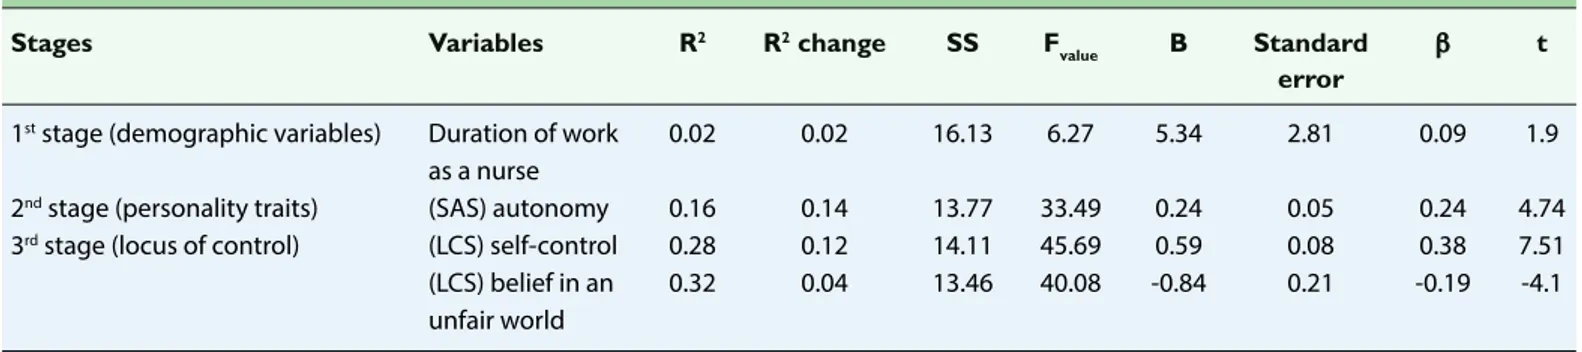 Table 4. Pearson correlation coefficients of research variables